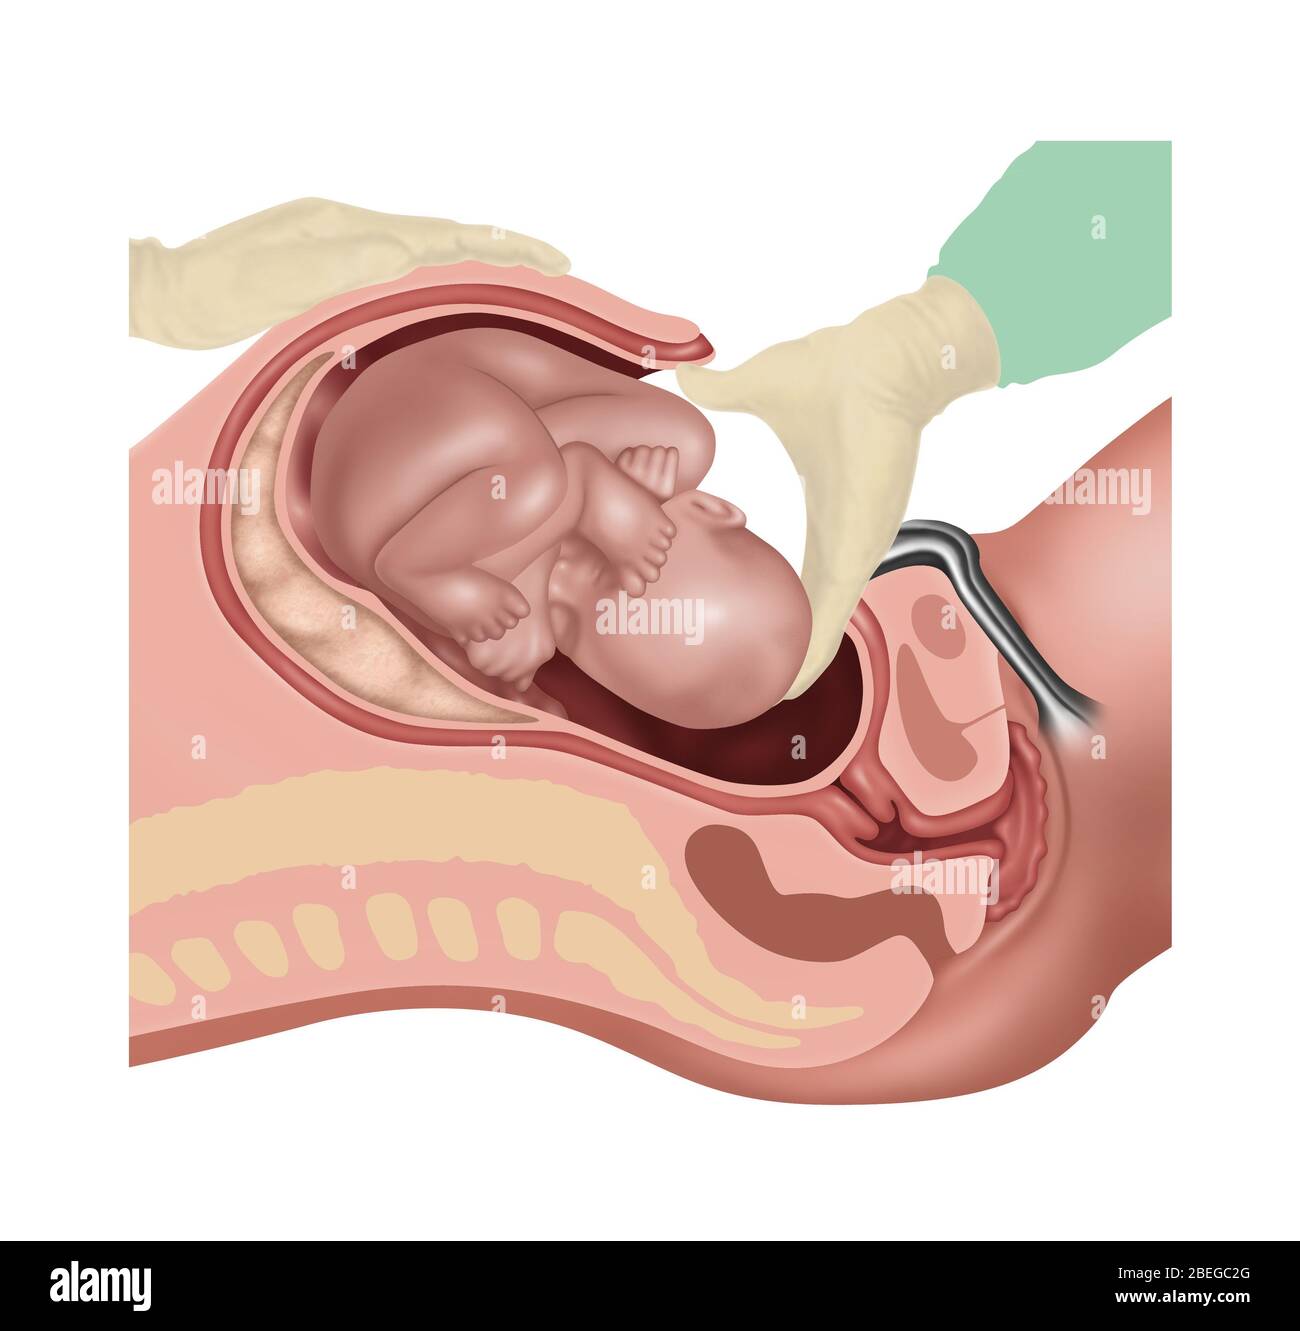 Cesarean Section Steps, Illustration, 2 of 4 Stock Photo